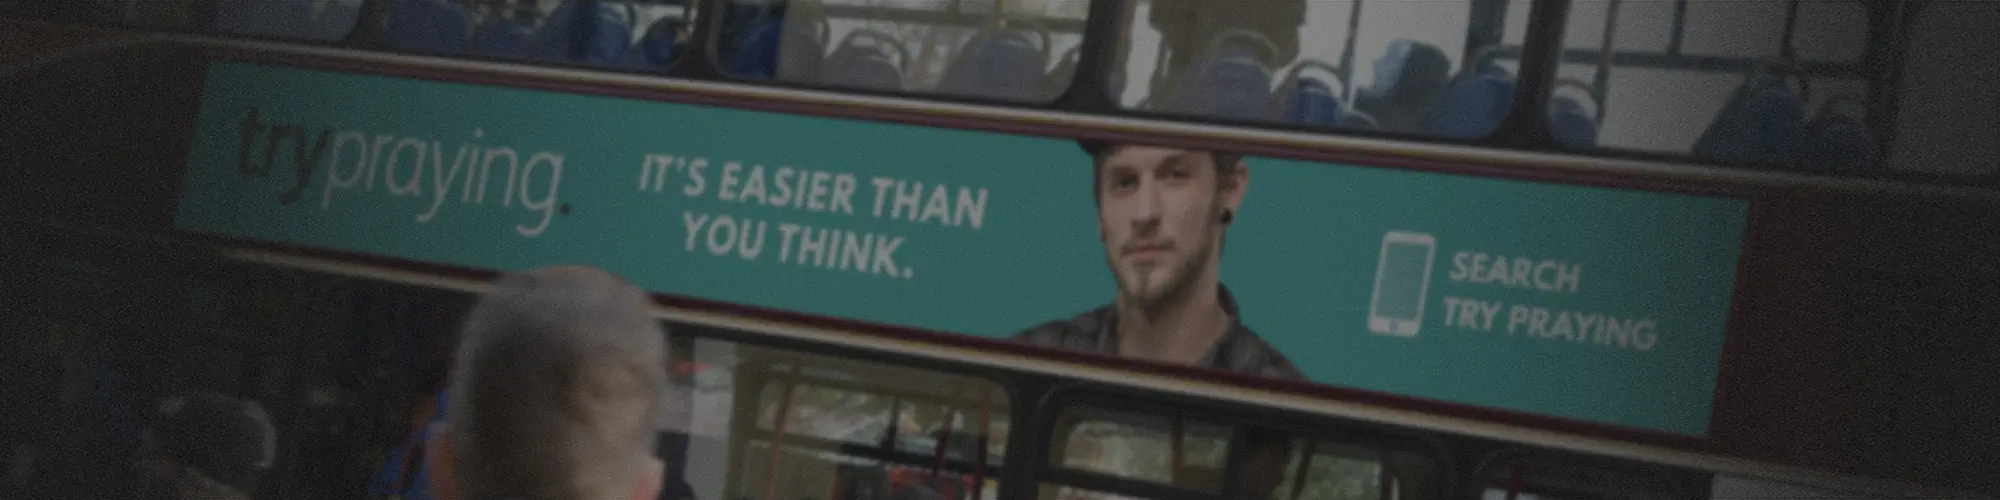 Trypraying advert on the side of a bus